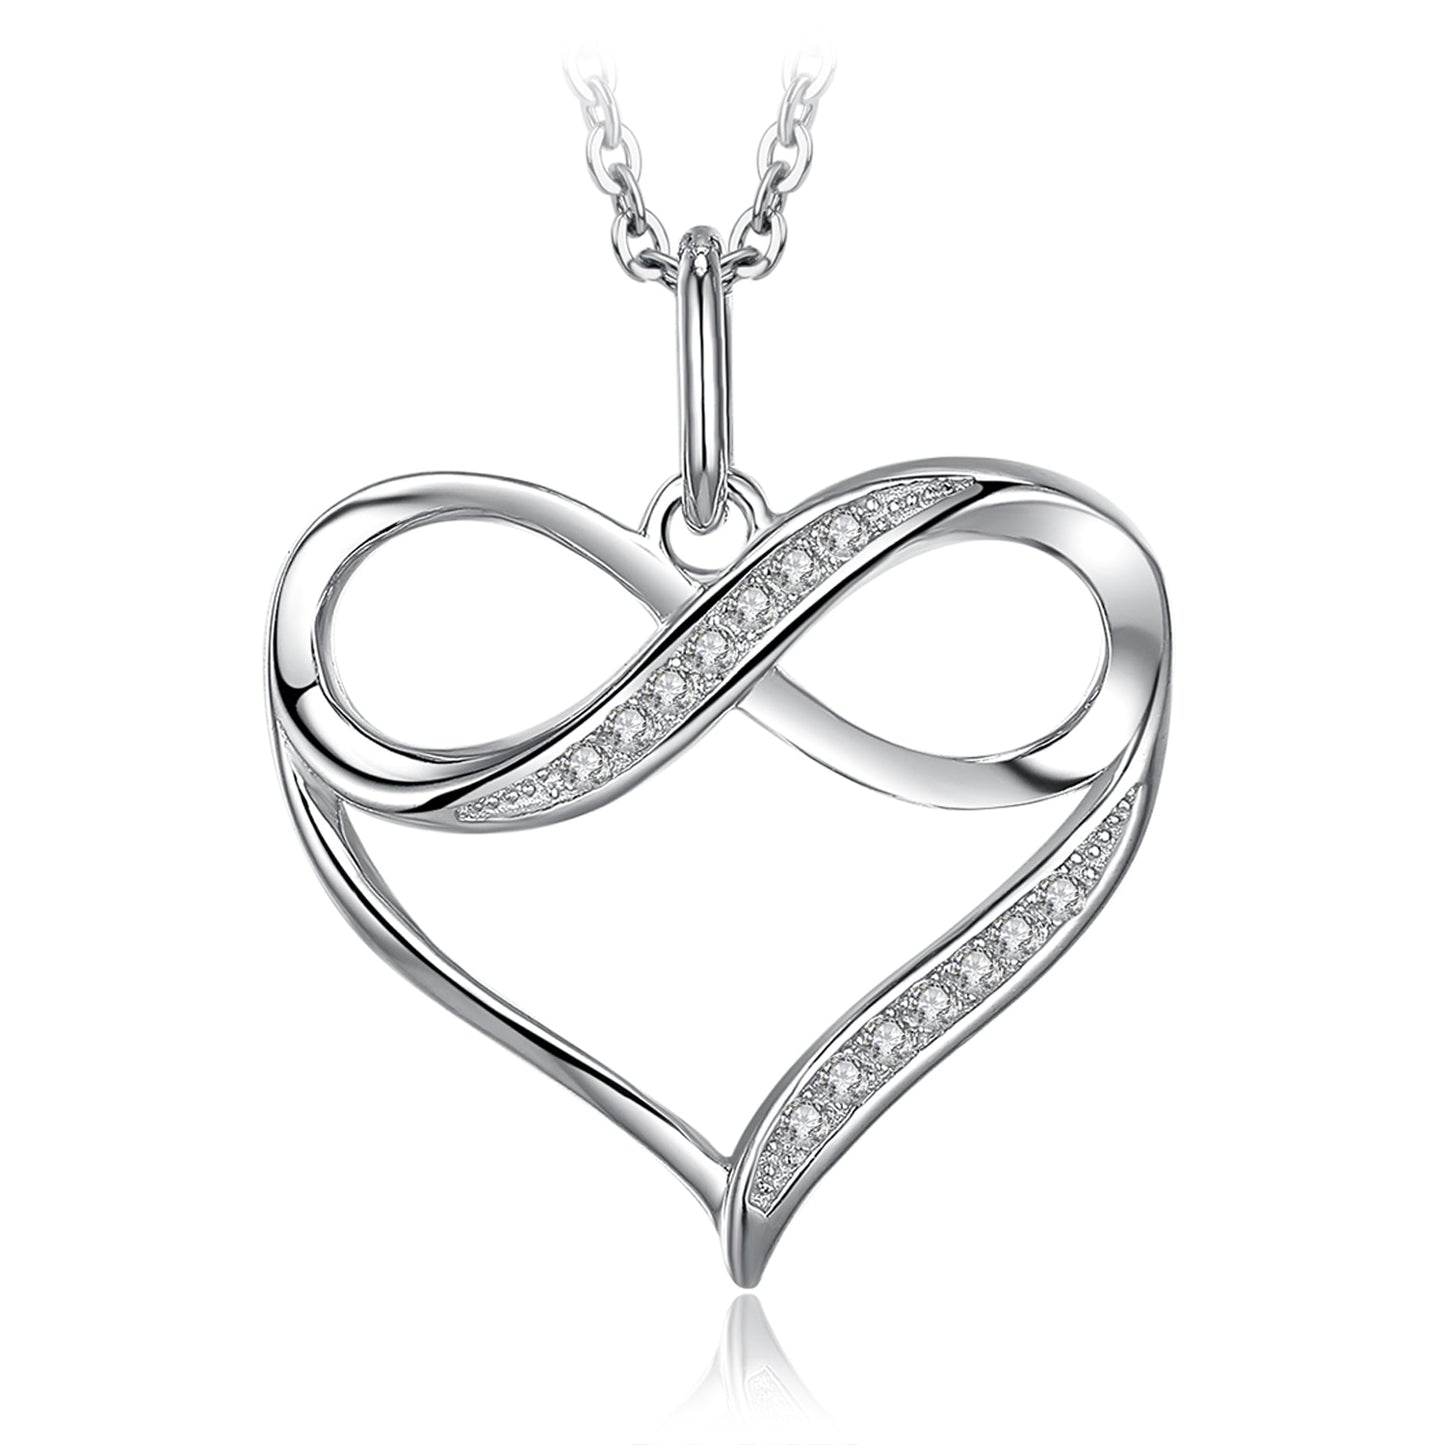 Jewelry Palace Infinity Love Knot Heart 925 Sterling Silver Pendant Necklace for Womam Girl Fashion Fine Jewelry Gift No Chain Default Title